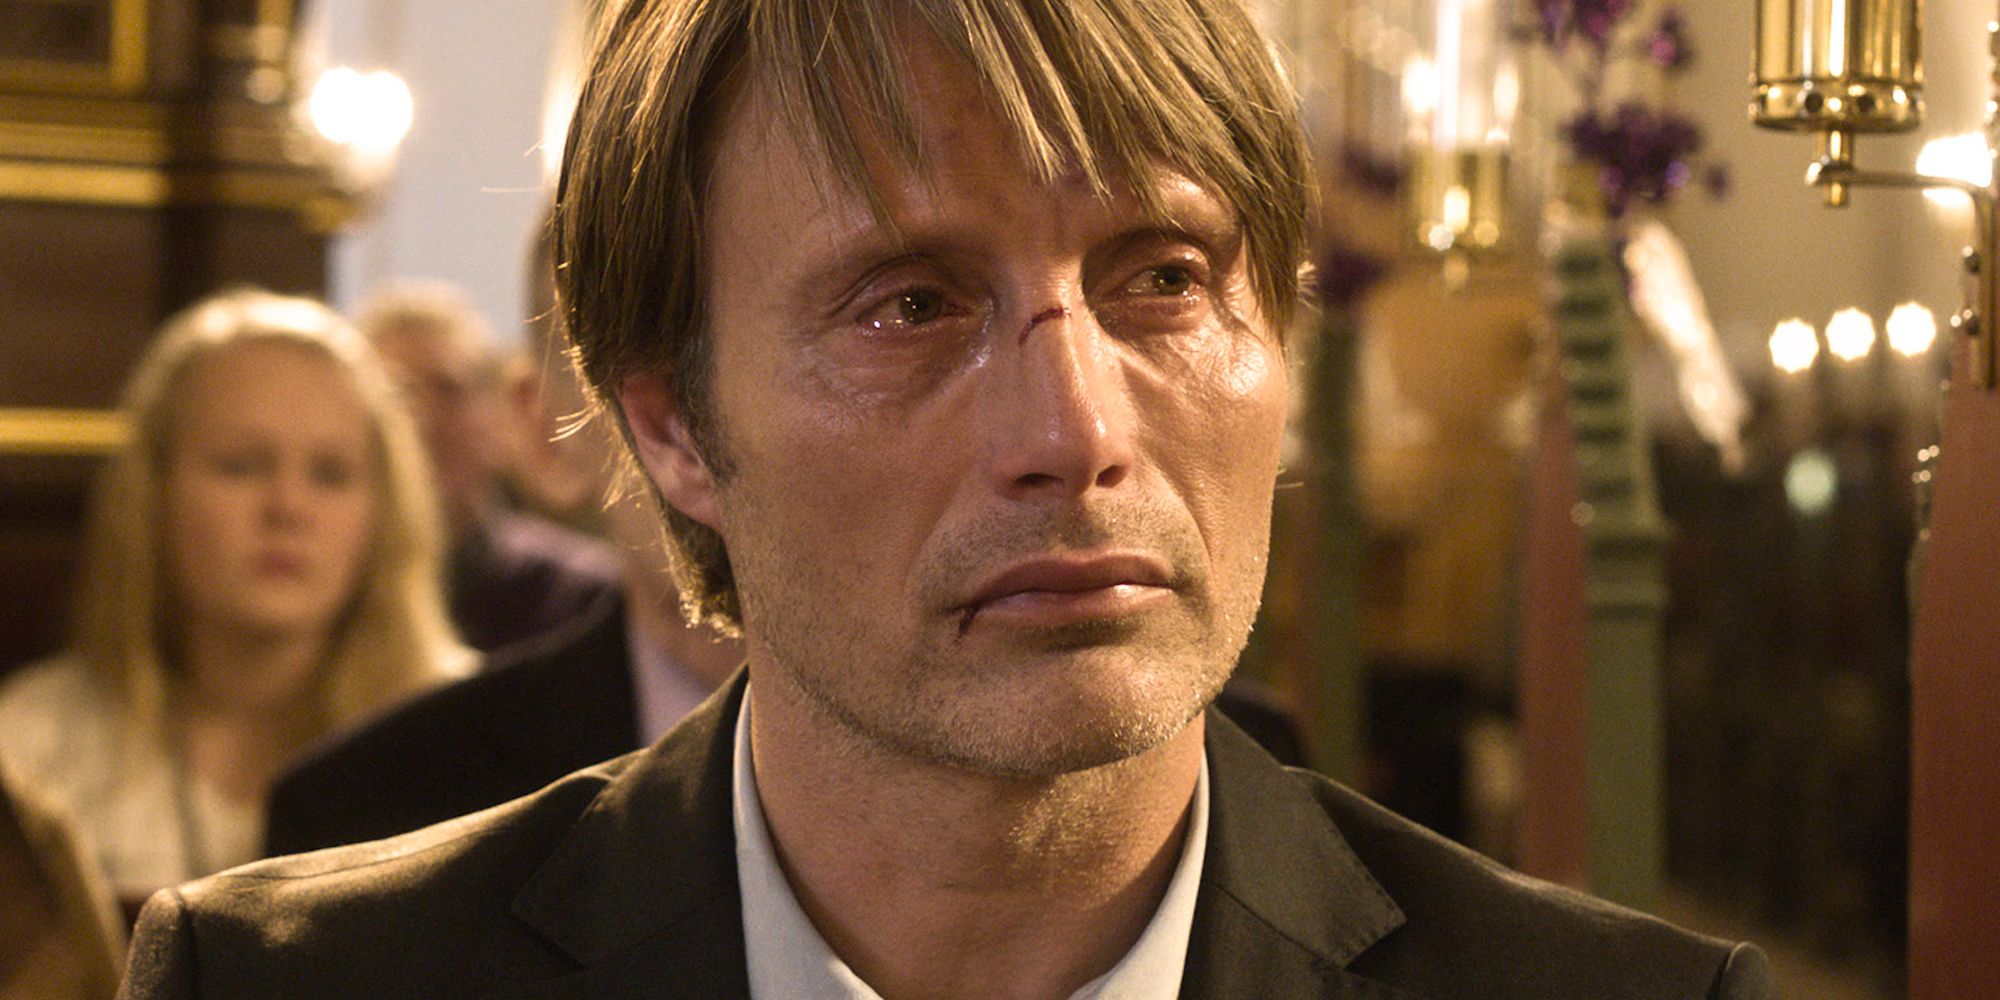 Mads Mikkelsen as Lucas crying and looking intently off-camera in The Hunt